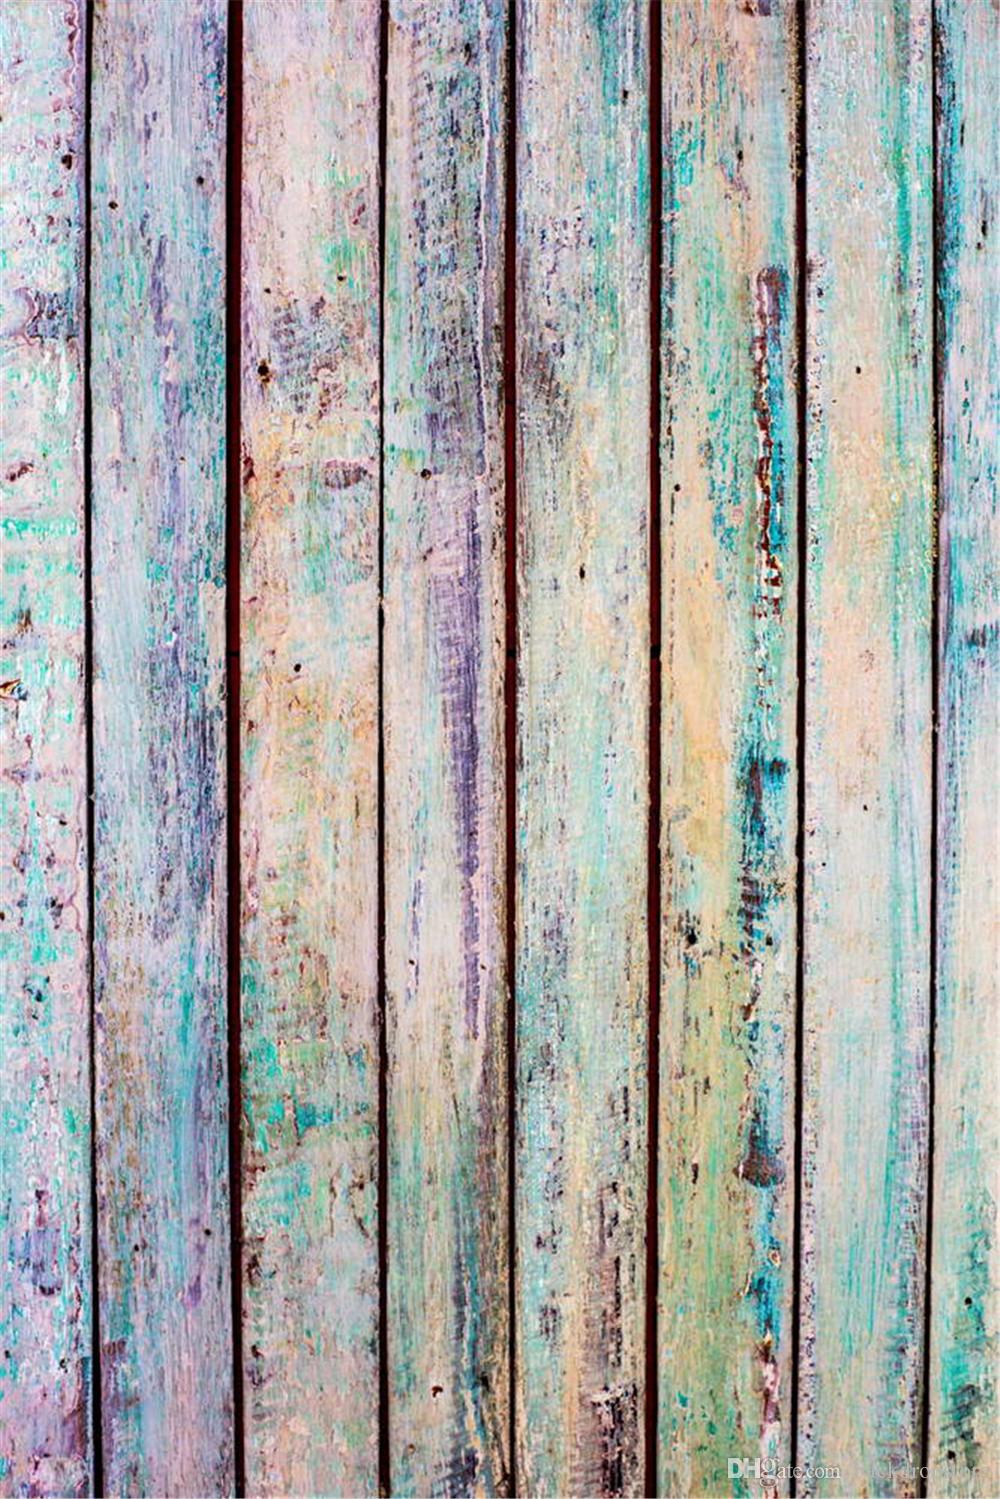 colorful wood wallpaper,green,wood,turquoise,teal,pattern